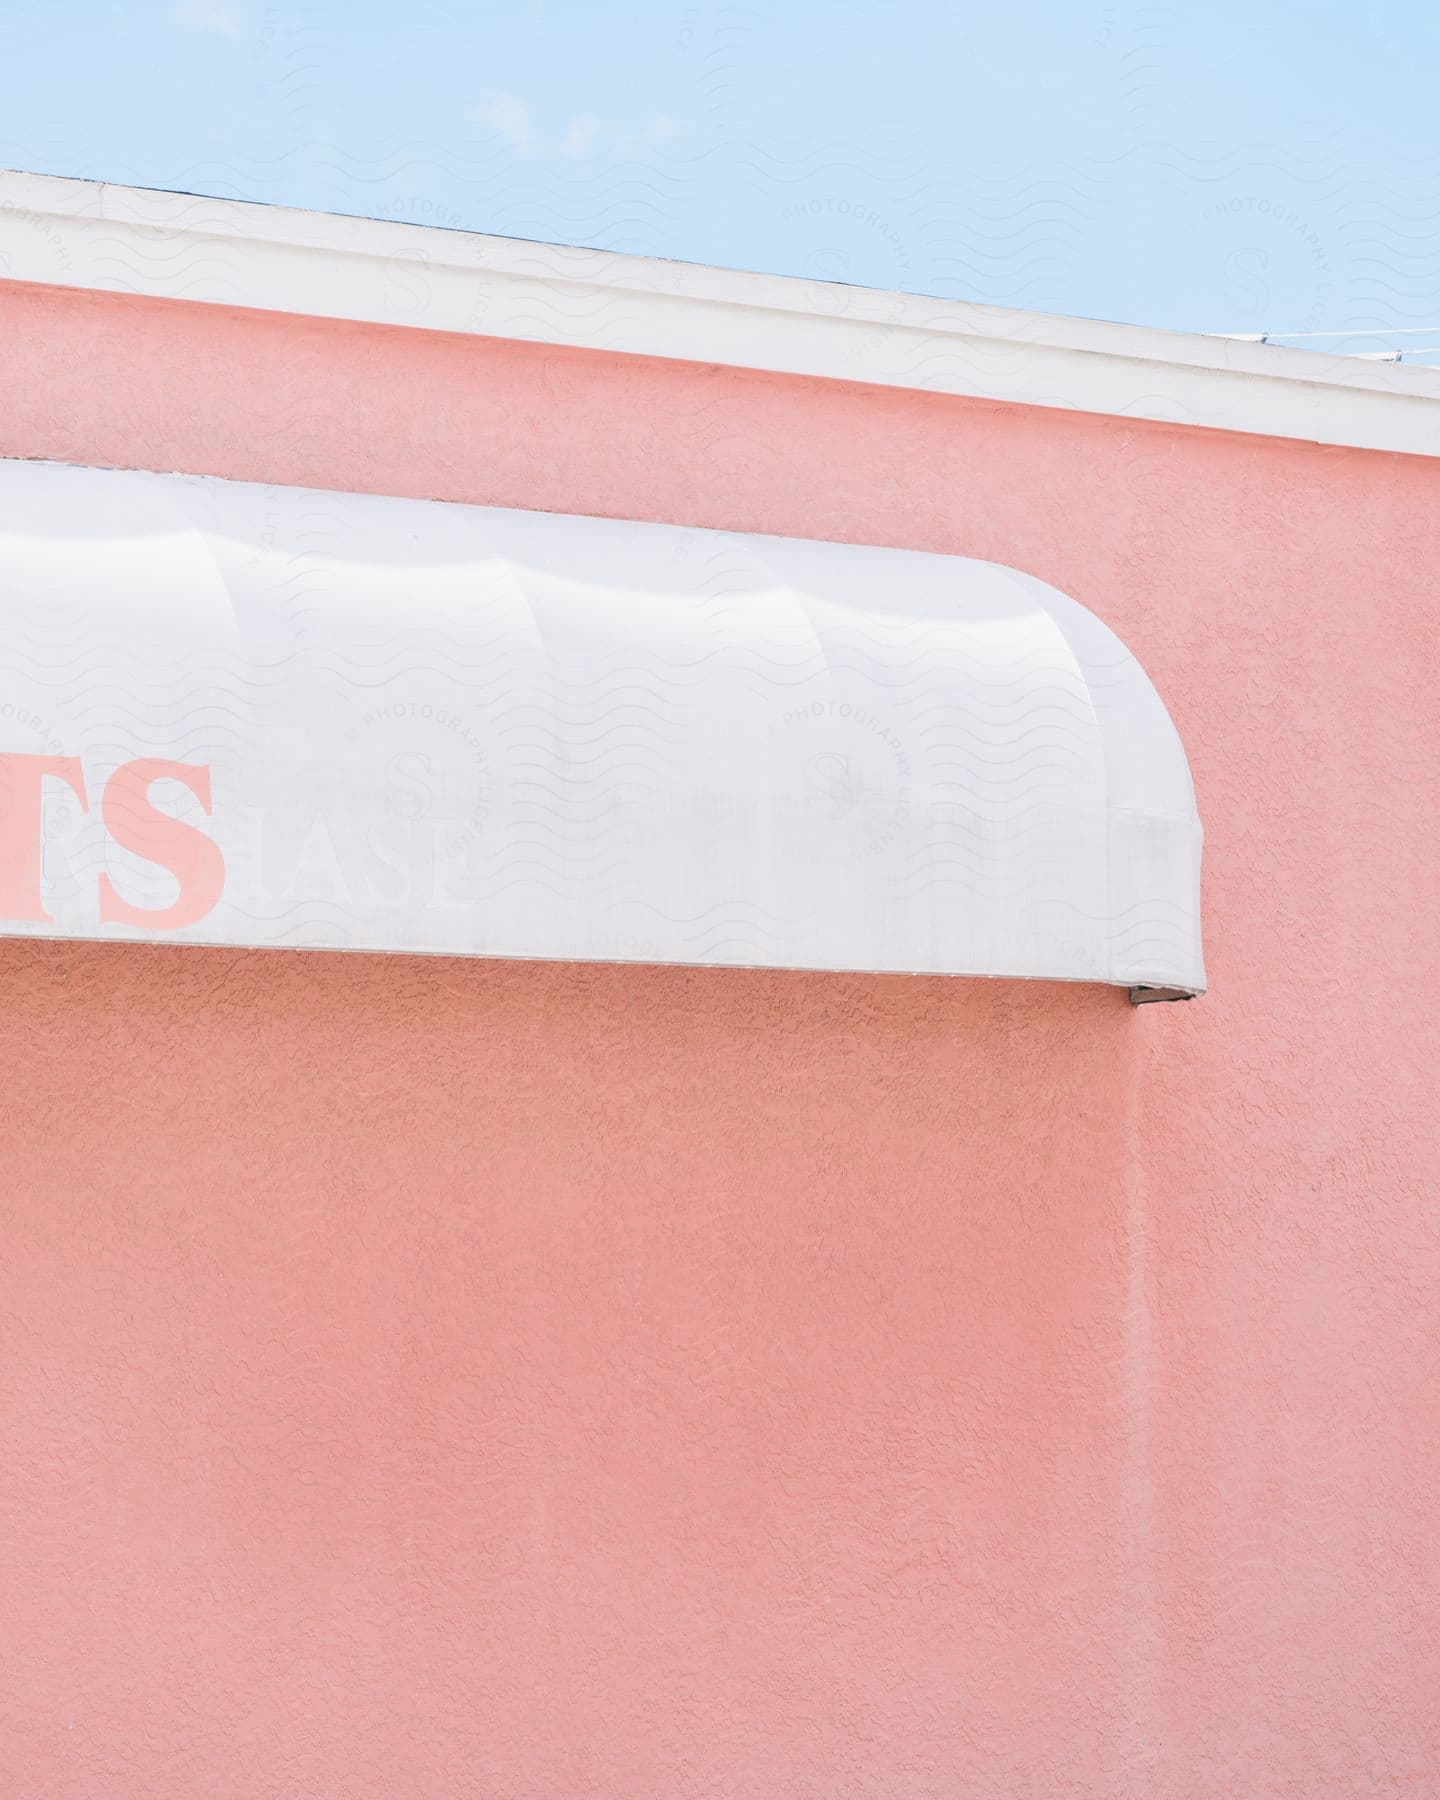 A white awning with pink writing on a pink wall.